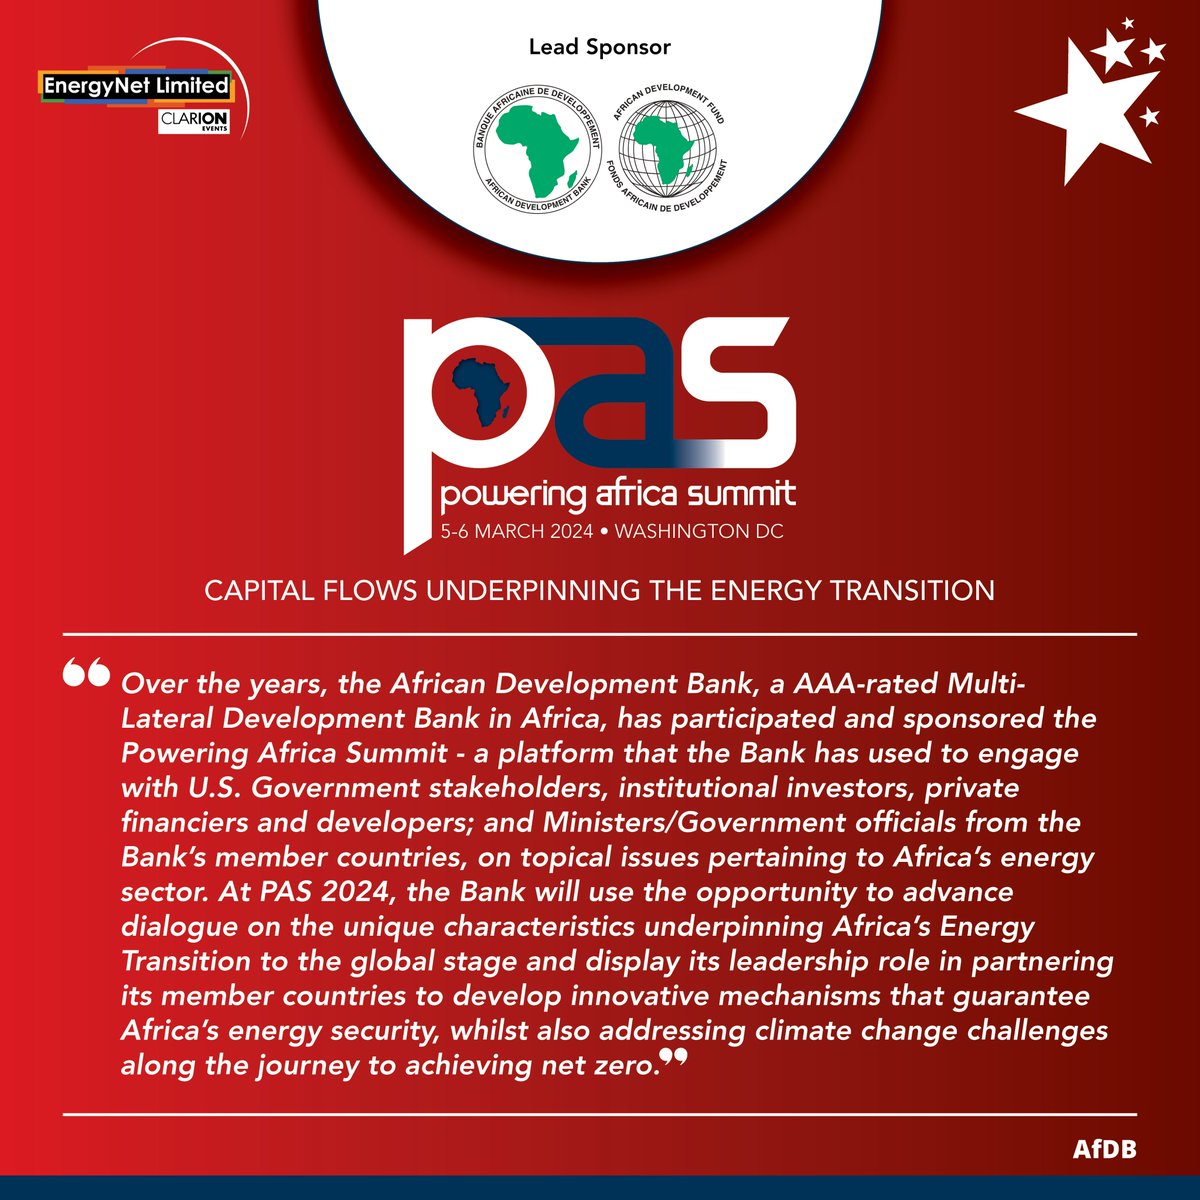 We are pleased to welcome @AfDB_Group as our lead Sponsor of #PAS24. They continue to join the discussion around the theme of Capital Flows Underpinning the Energy Transition. Find out more here: lnkd.in/e37dFKY 📅 5-6 March #WashingtonDC